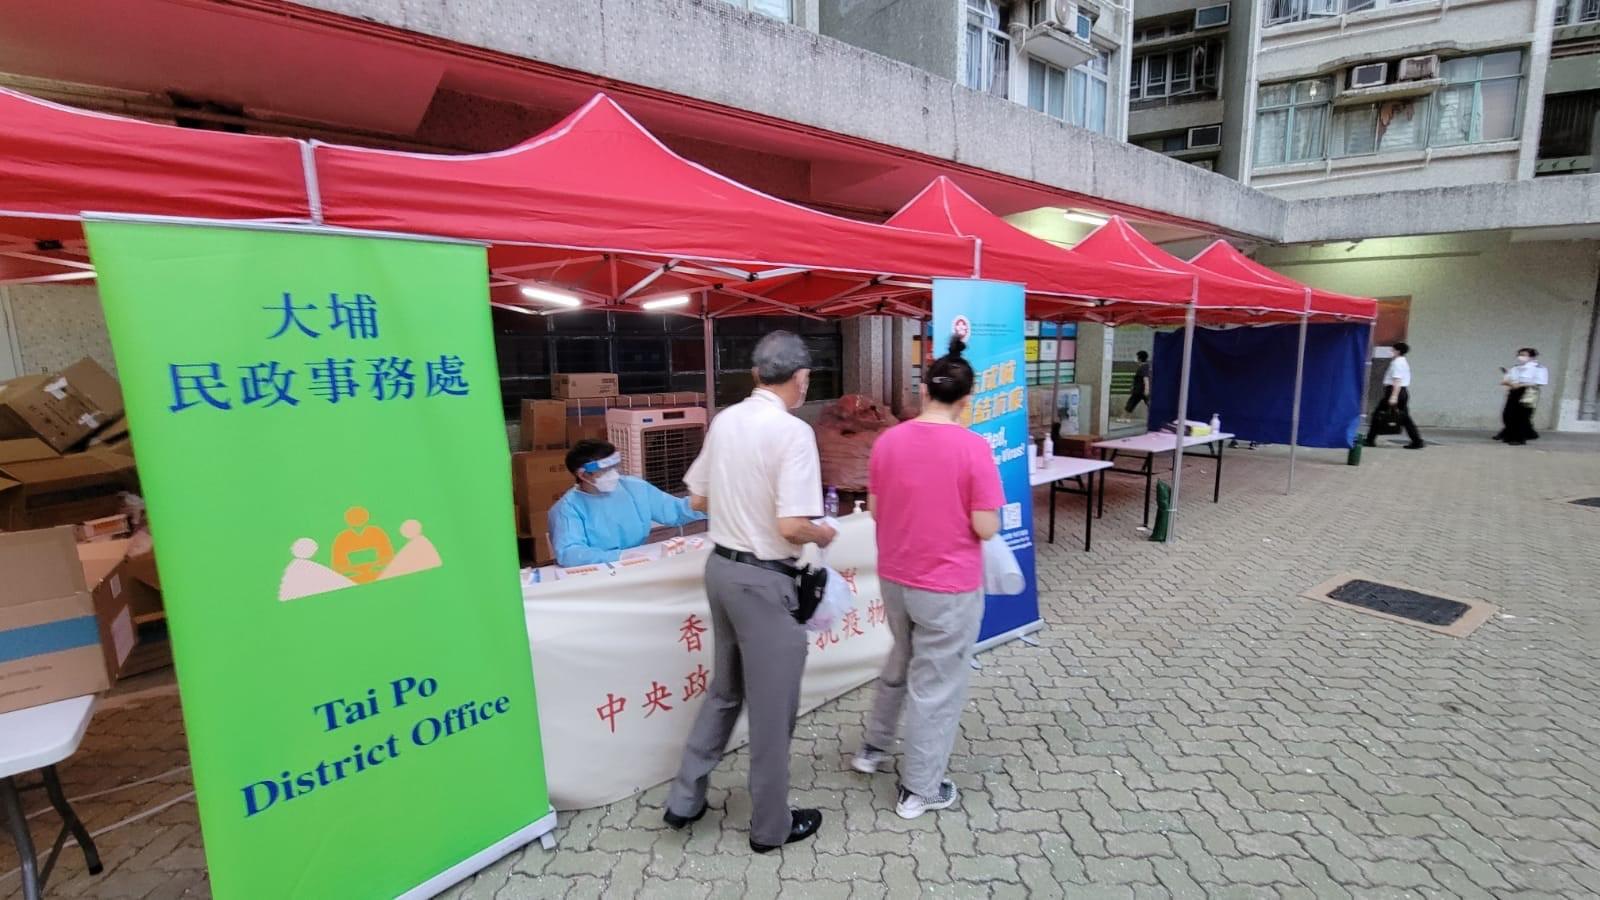 The Government yesterday (July 15) made a "restriction-testing declaration" and issued a compulsory testing notice in respect of the specified "restricted area" in Tai Po (i.e. Chung Chun House, Chung Nga Court, Tai Po, excluding the non-domestic units on G/F), under which people within the specified "restricted area" in Tai Po were required to stay in their premises and undergo compulsory testing. Photo shows the staff distributing anti-epidemic proprietary Chinese medicines donated by the Central People's Government or procured with the co-ordination of the Central People's Government to persons subject to compulsory testing in the "restricted area".
